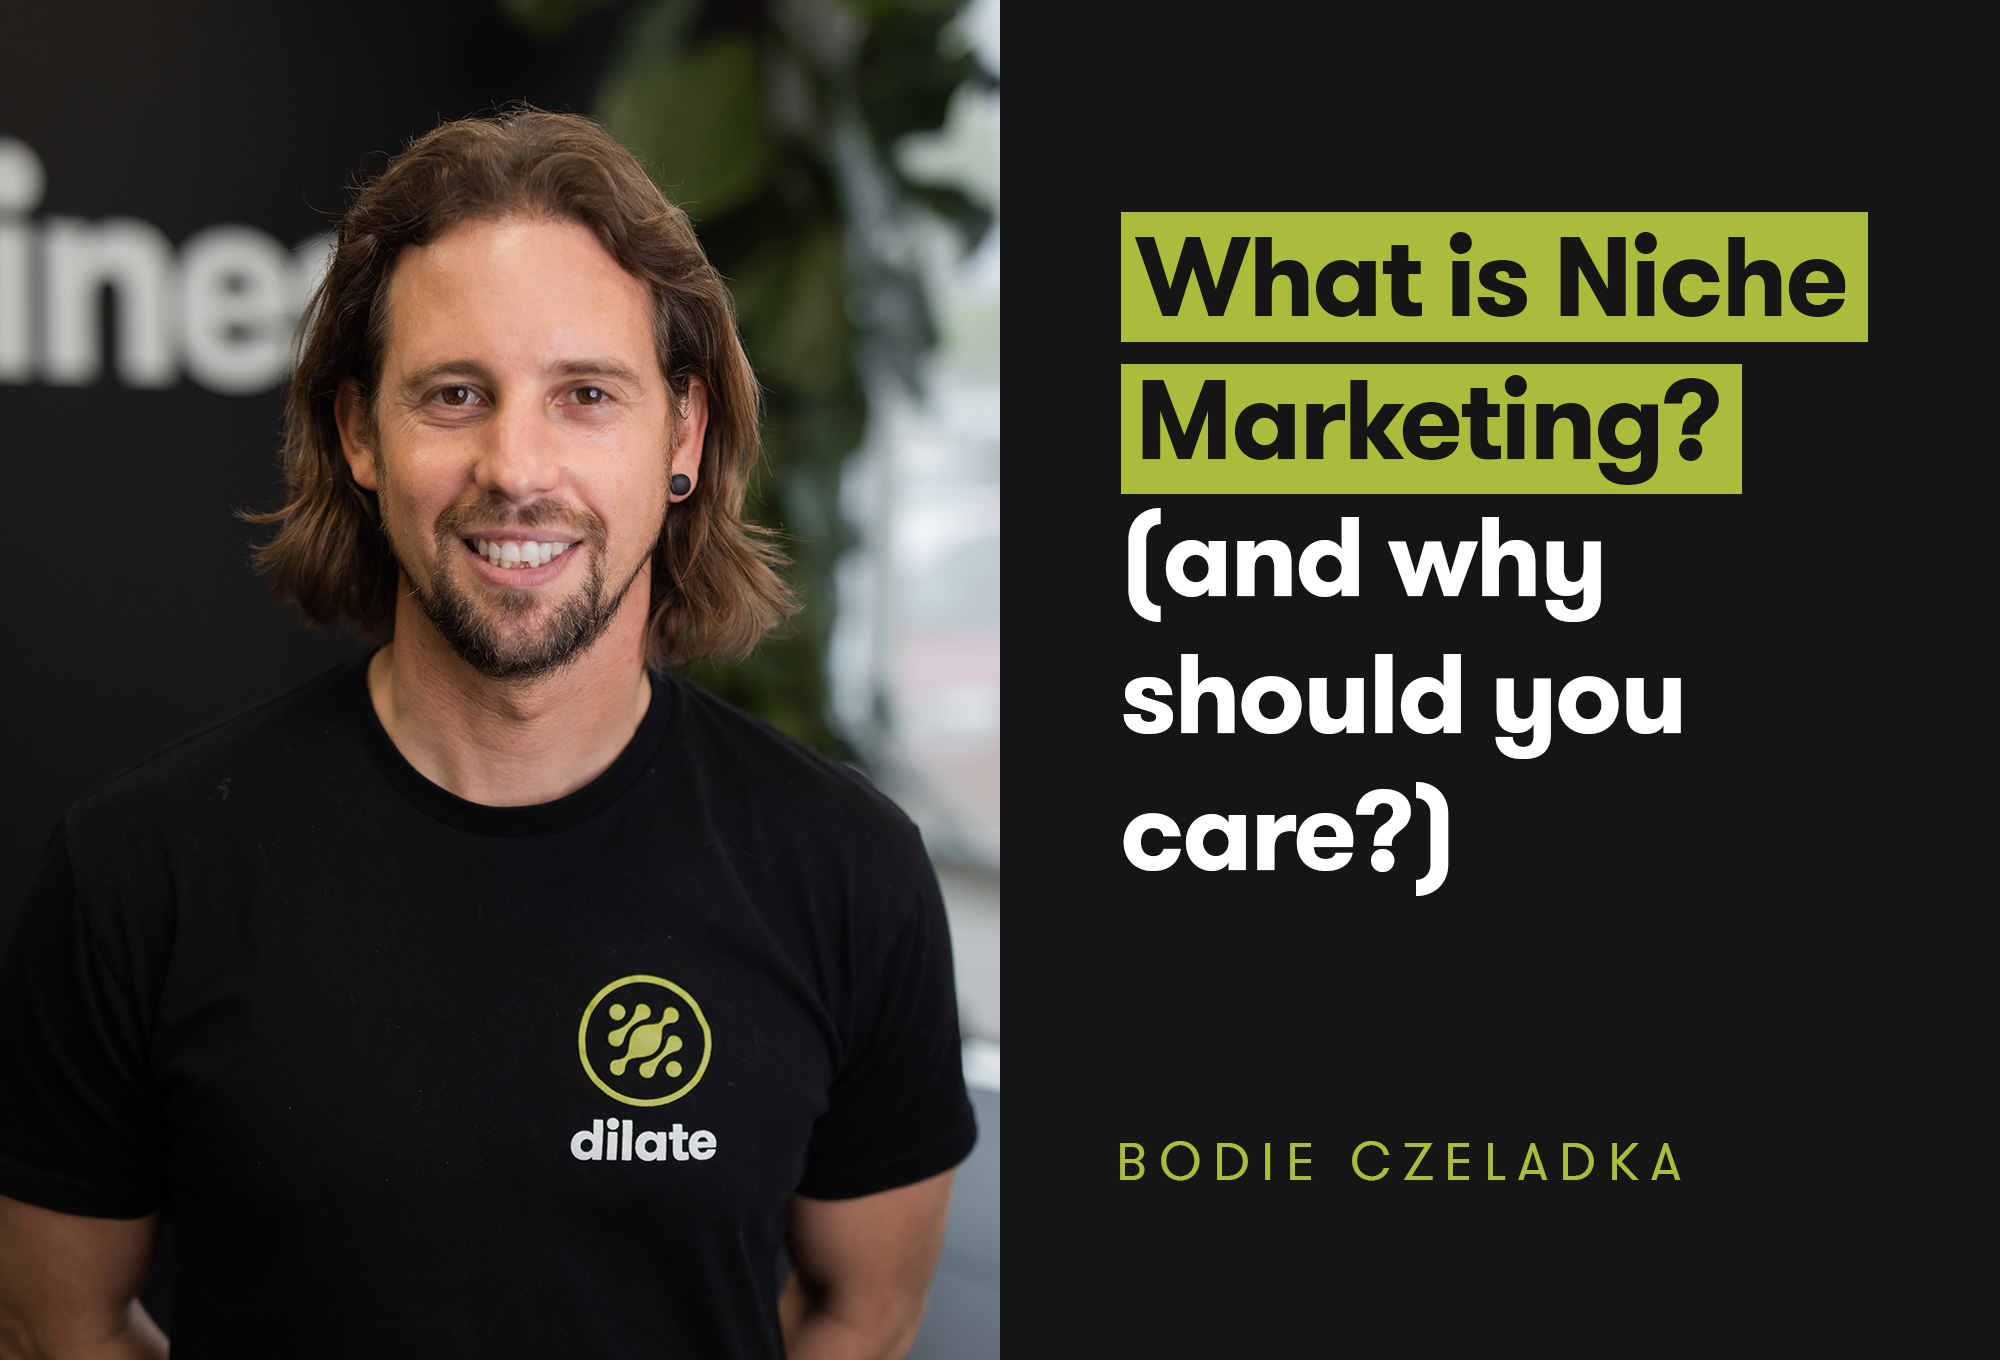 What is Niche Marketing and Why Should You Care